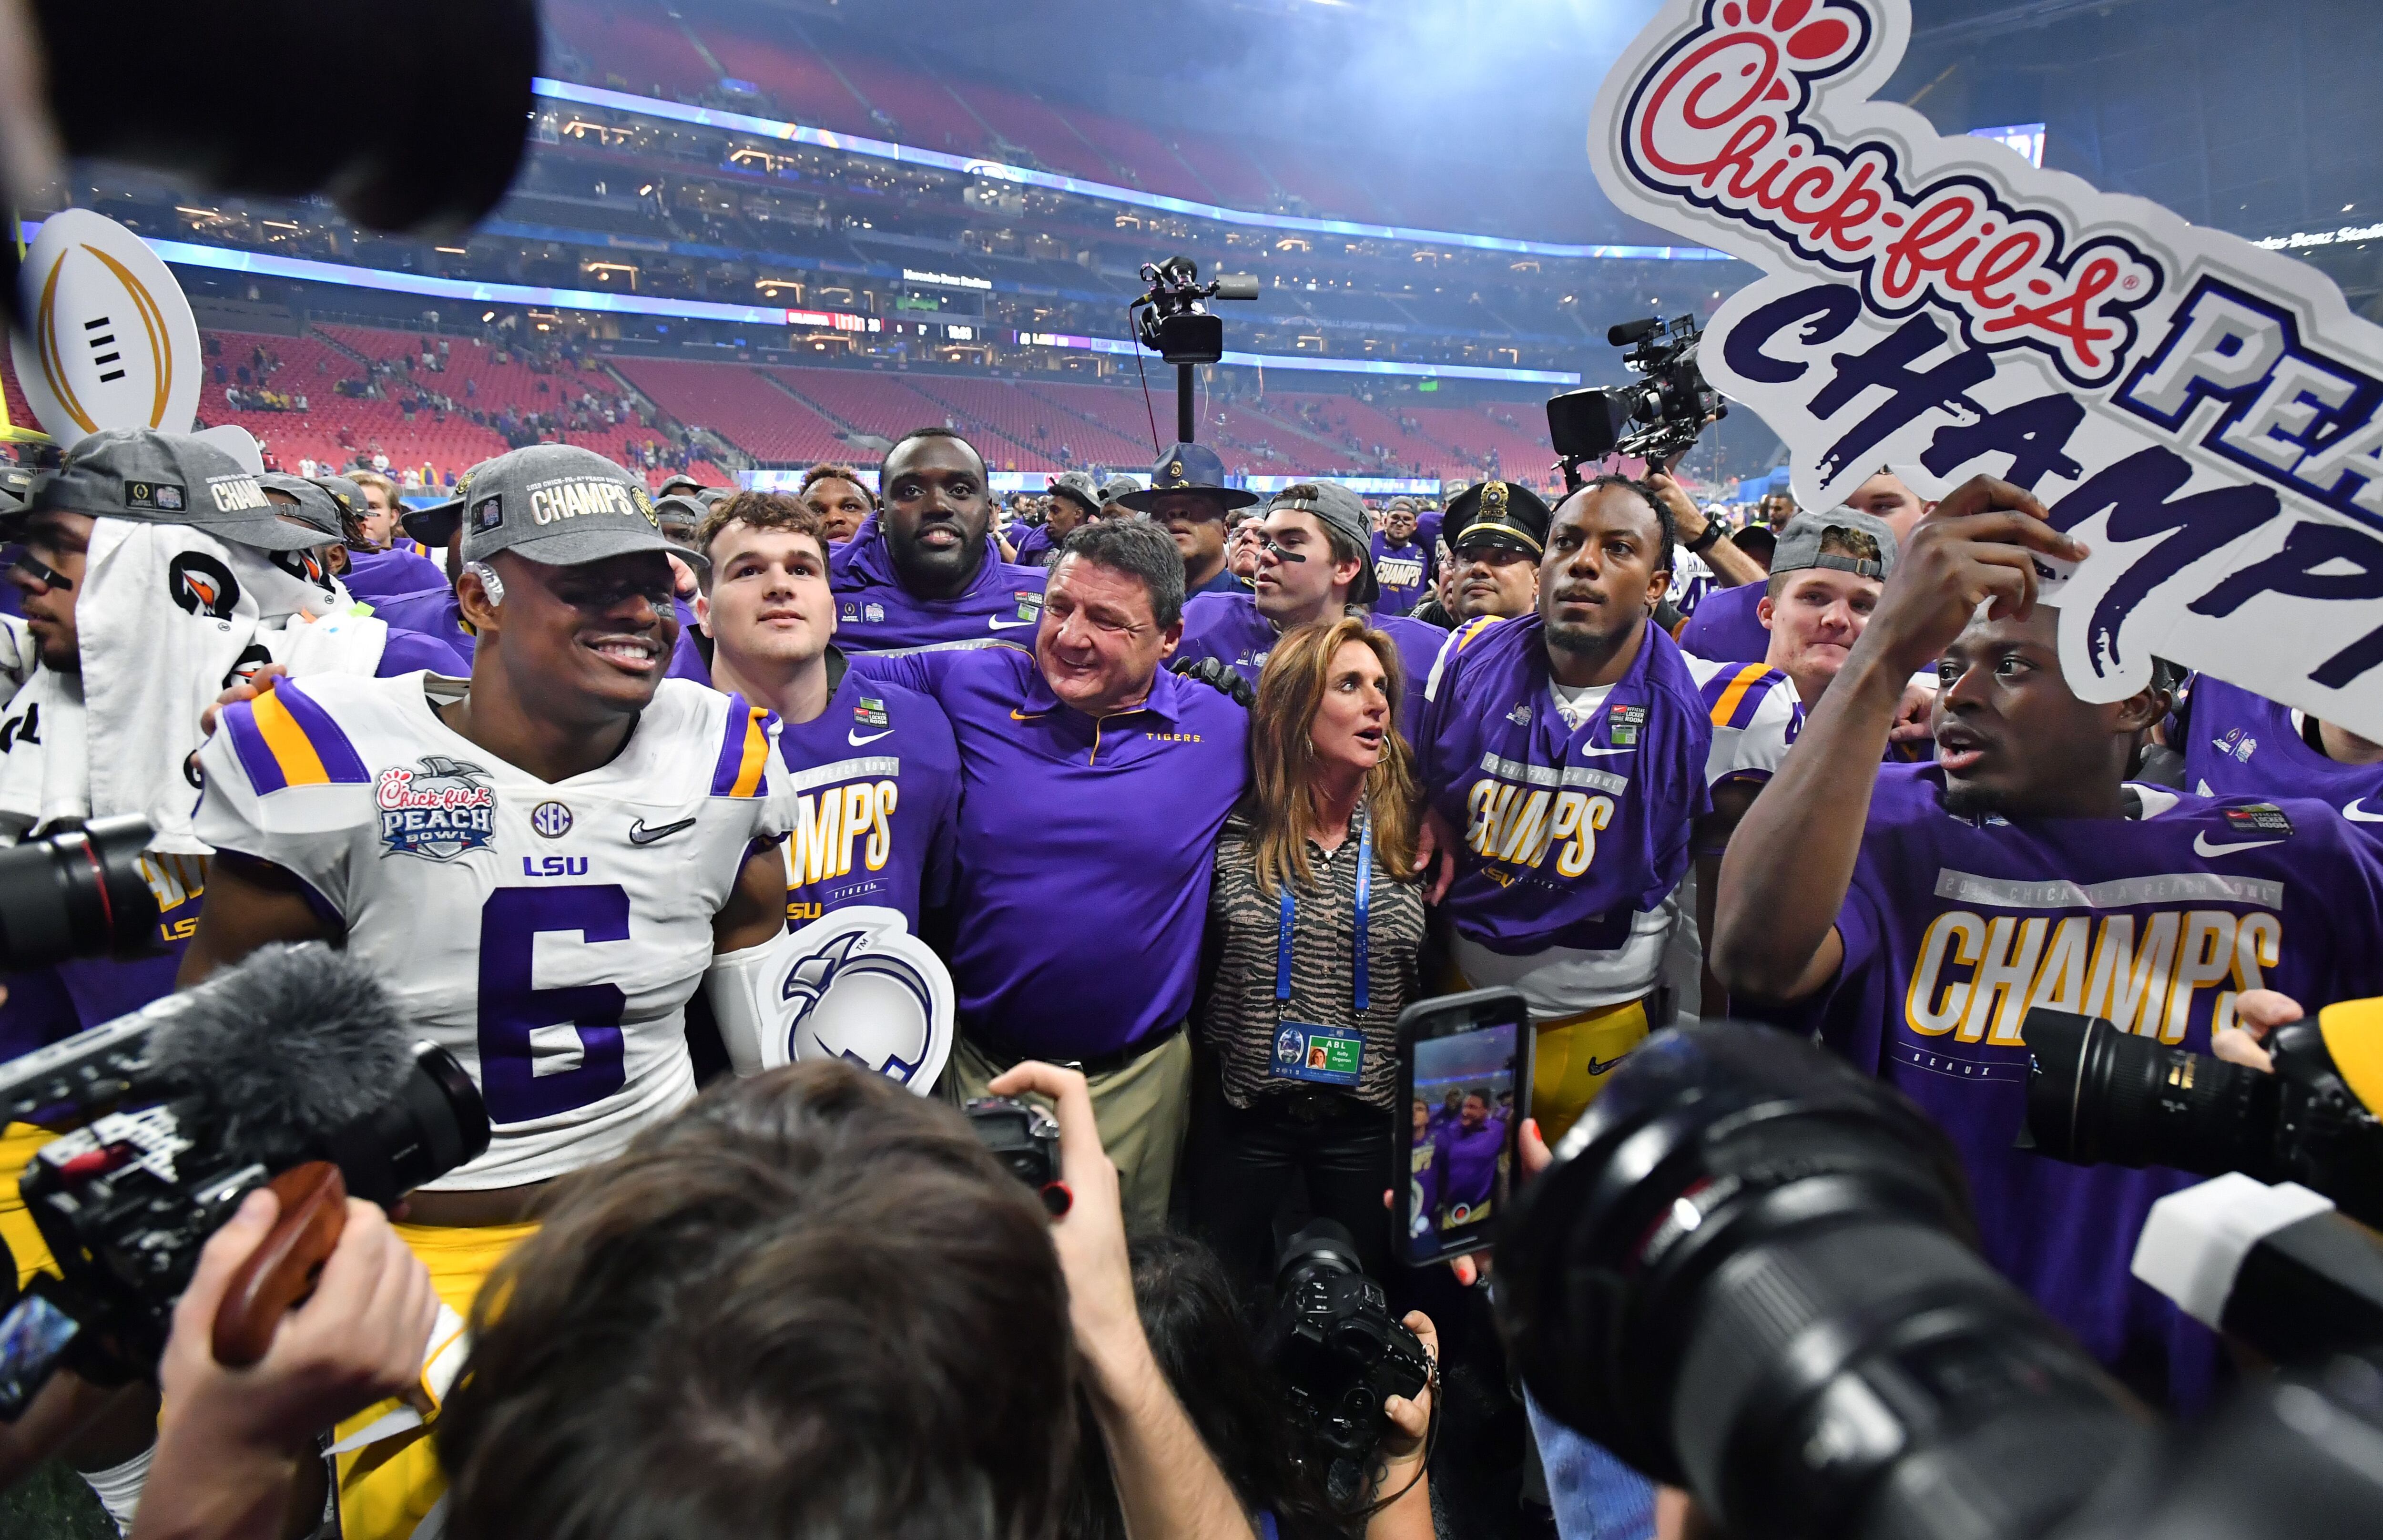 He's Coach O, and he saw the offensive light